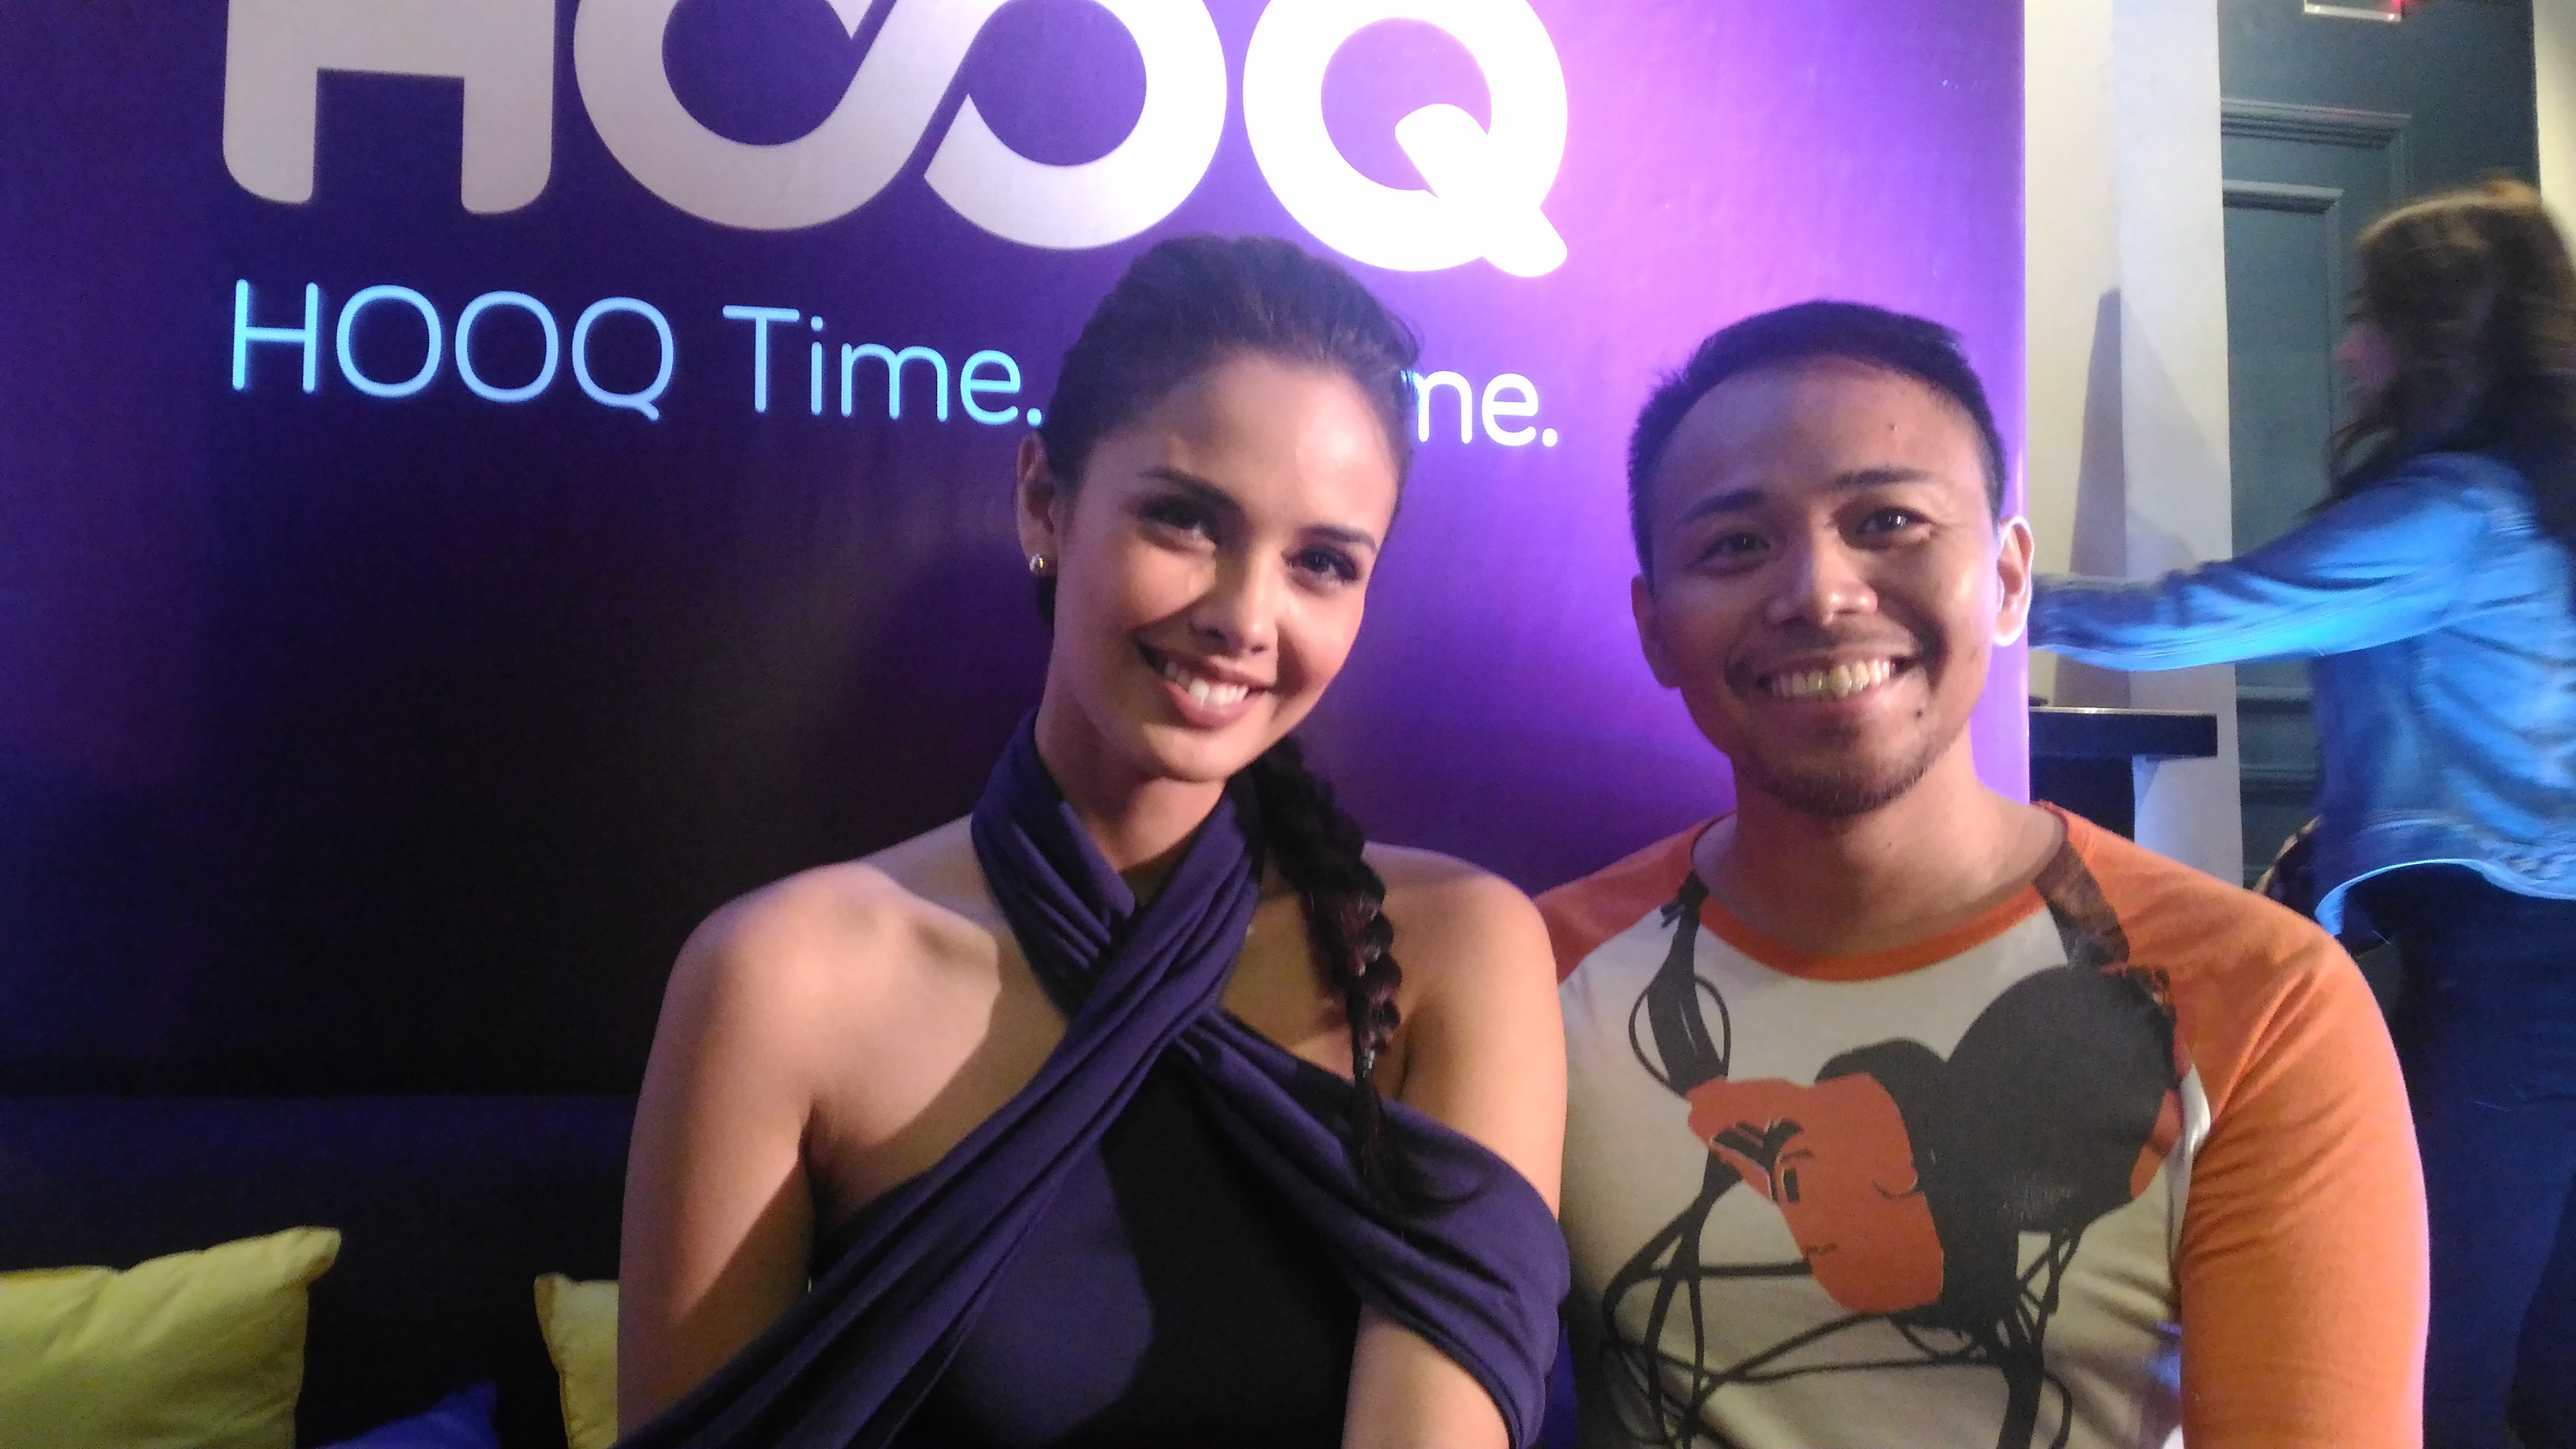 Beauty queen Megan Young is Hooq’s Philippine ambassador. Here she is shown with an ecstatic fan. Photo by TOTEL V. DE JESUS